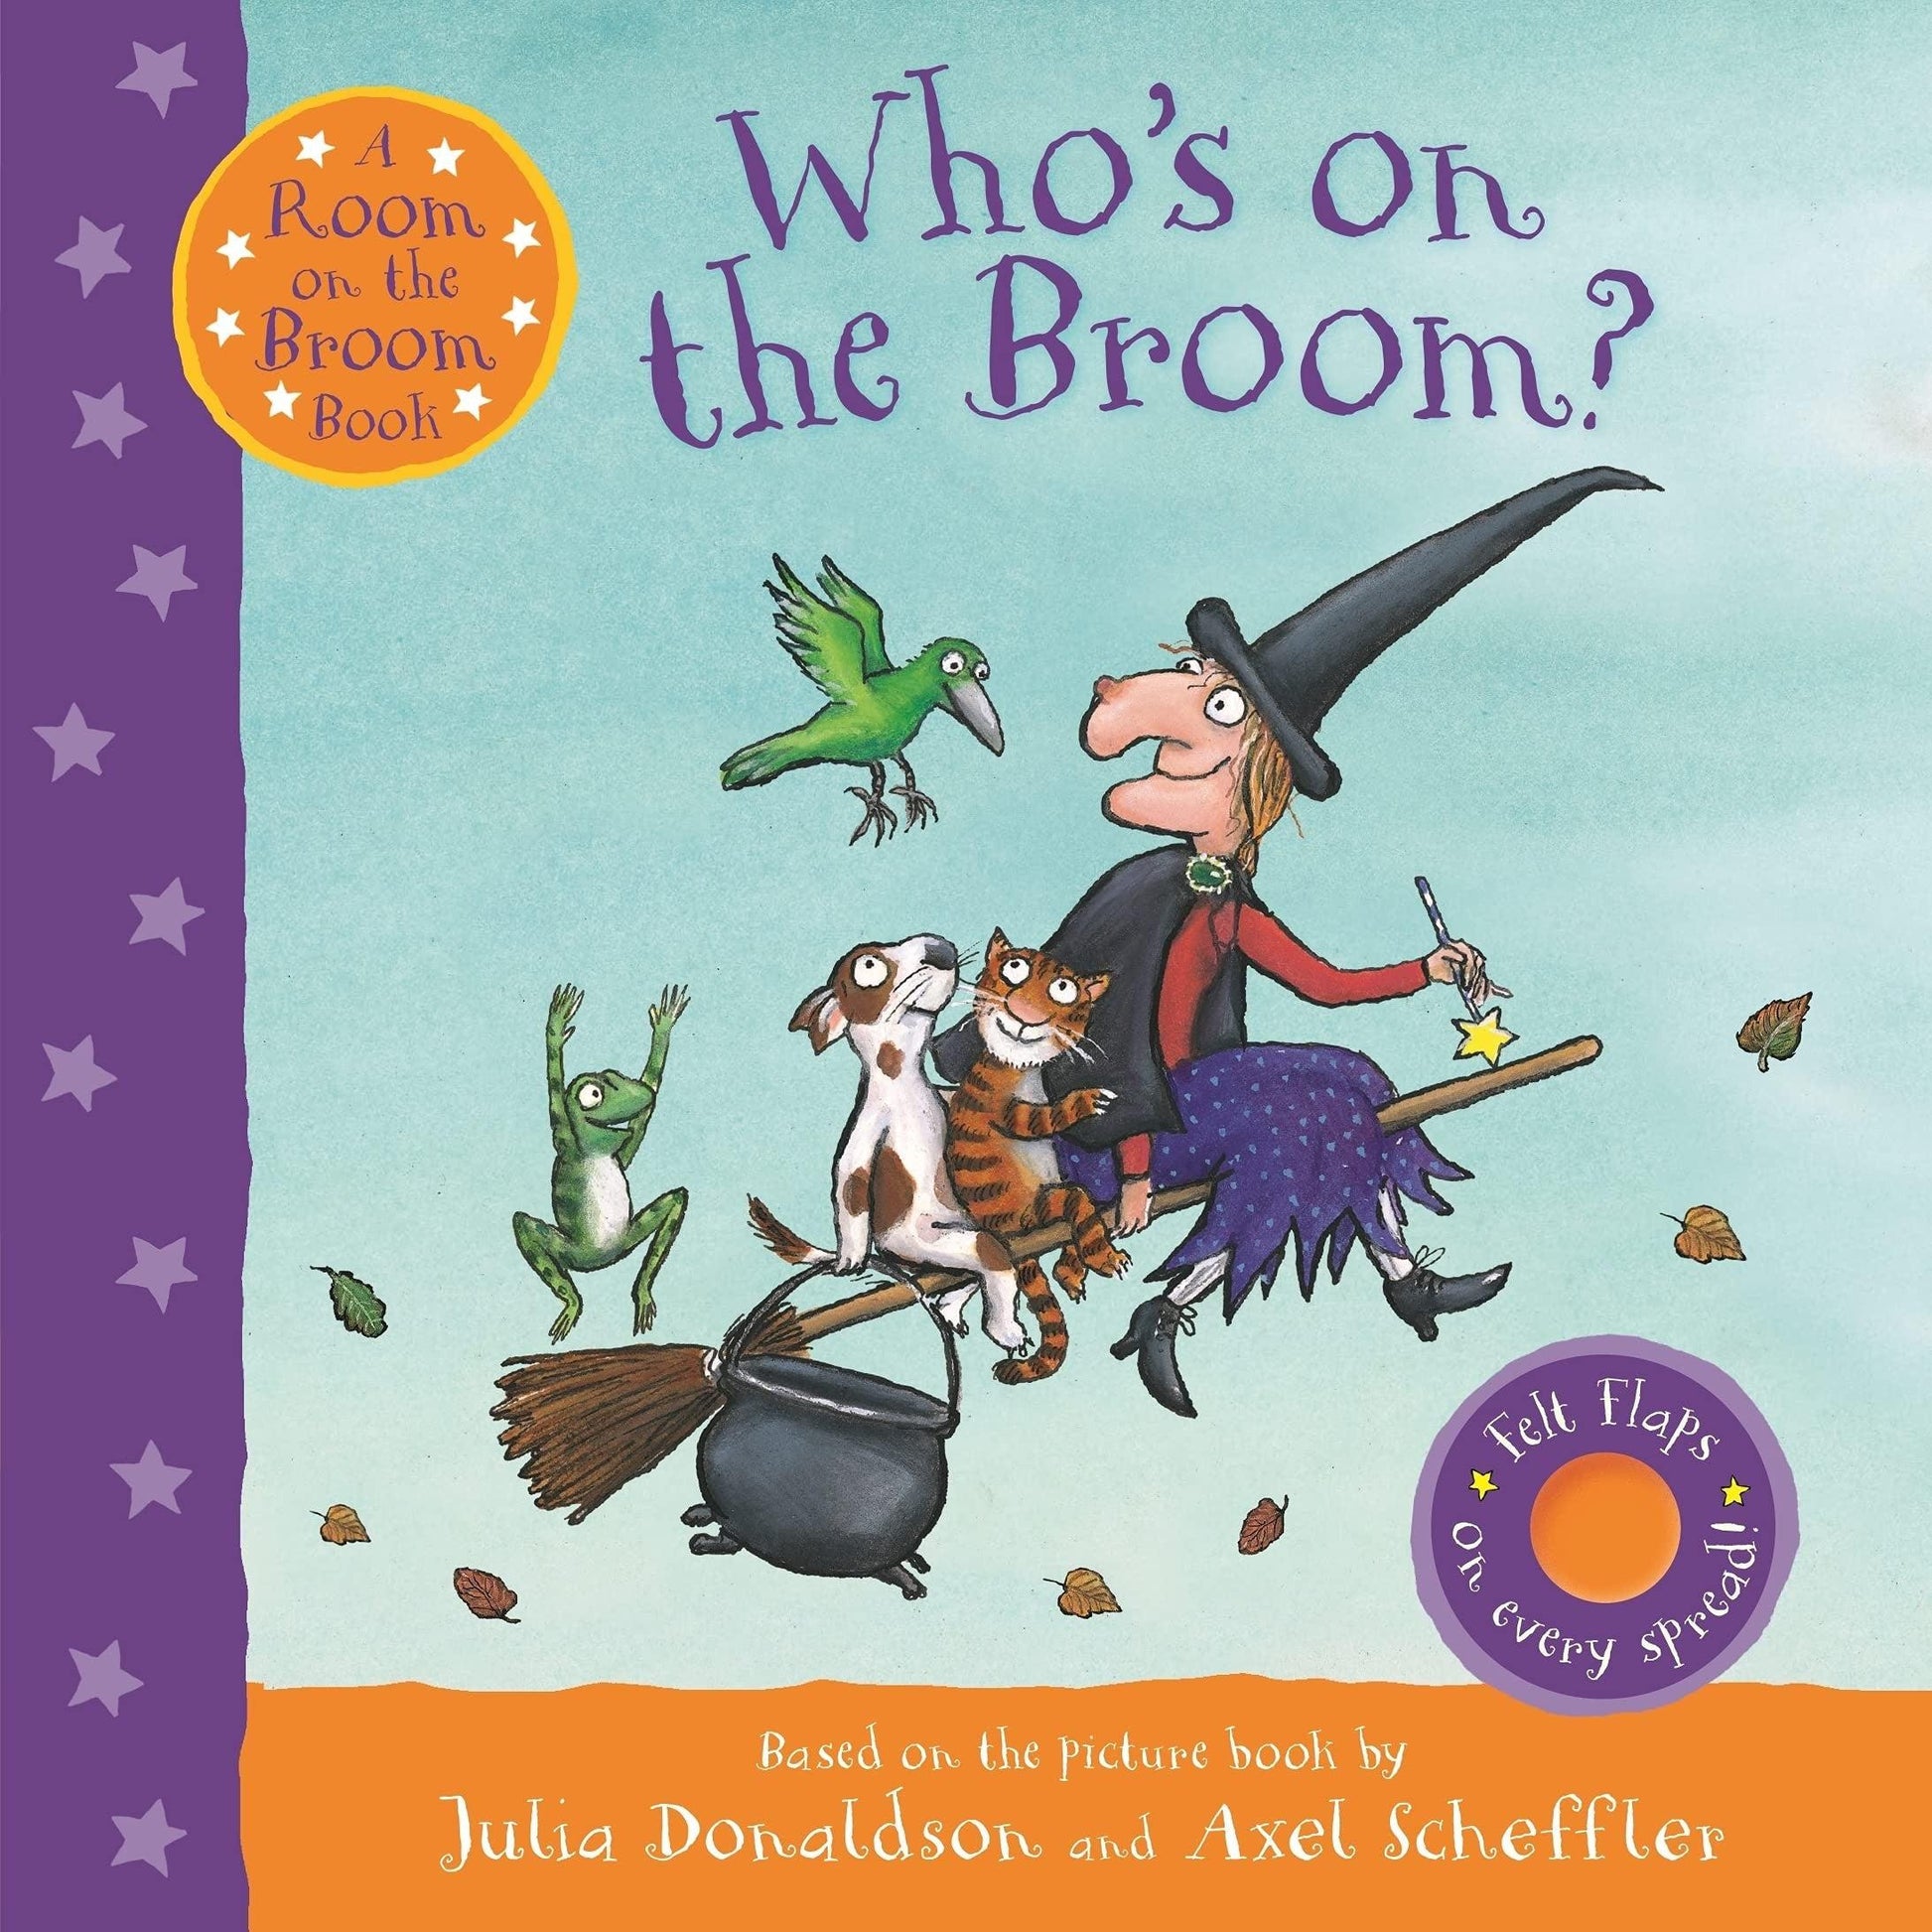 Who's on the Broom?: A Room on the Broom Book - Julia Donaldson & Axel Scheffler